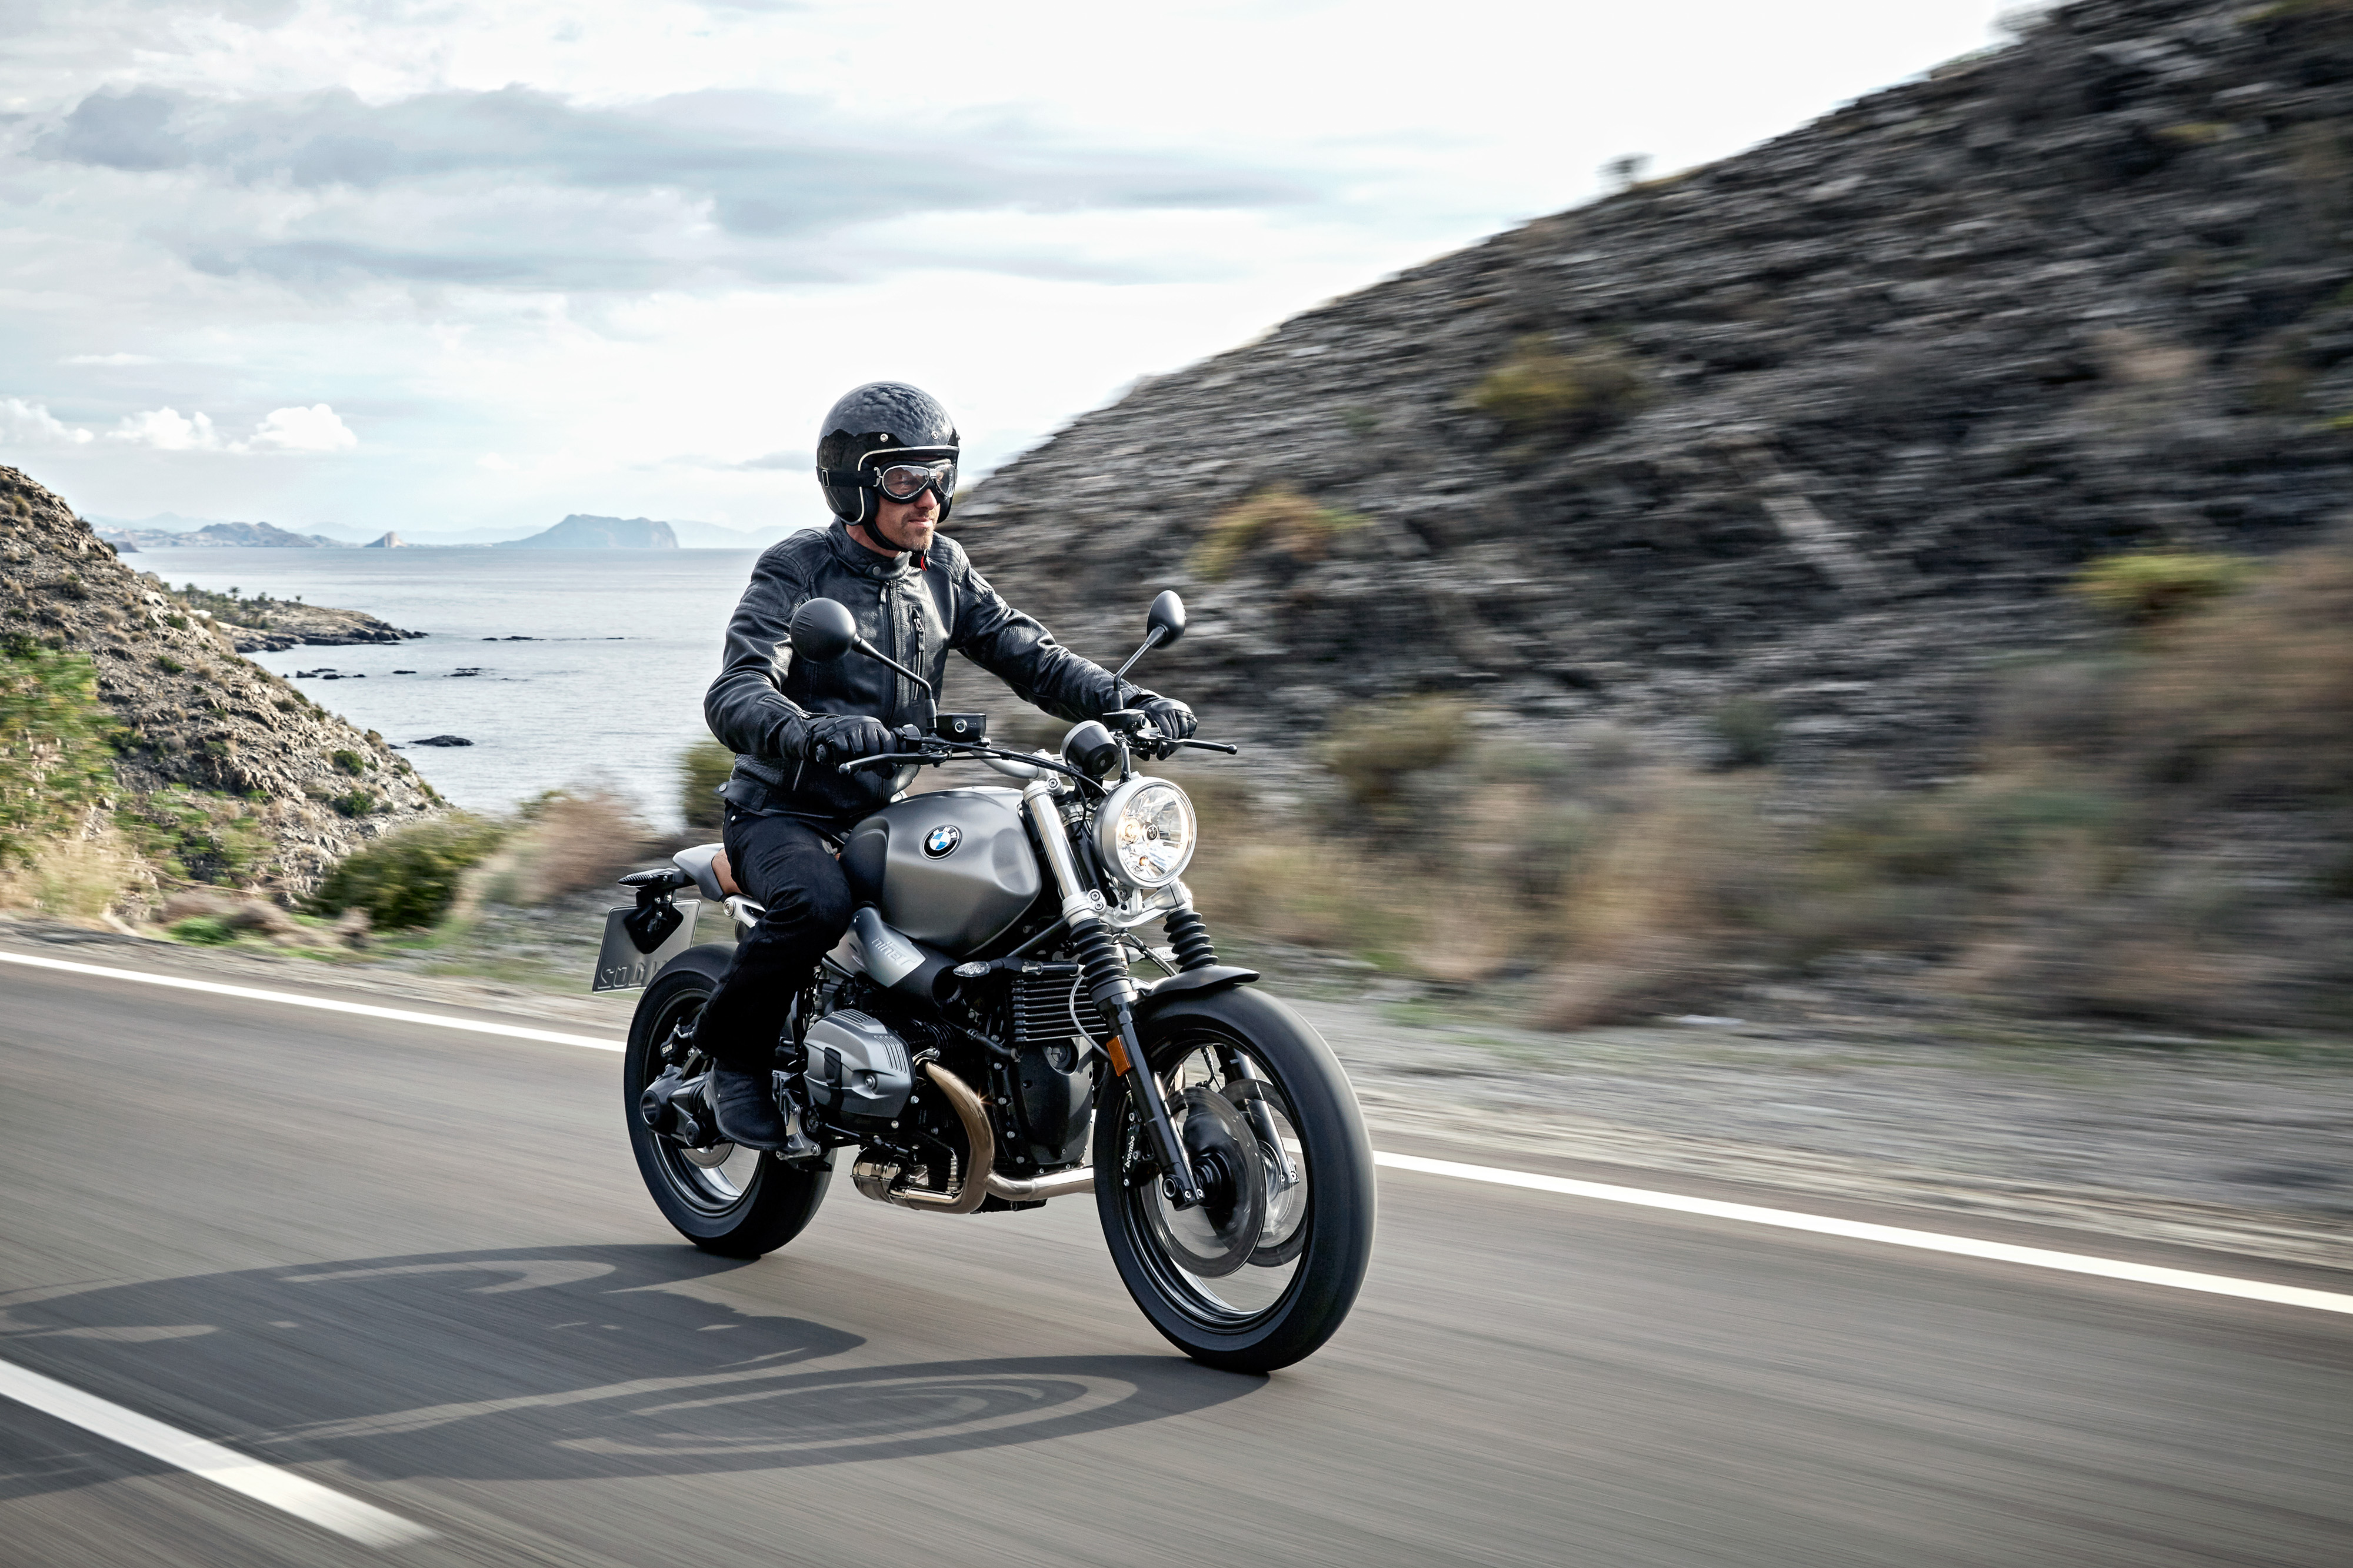 The new BMW R nineT Scrambler - a down-to-earth character beyond established conventions.